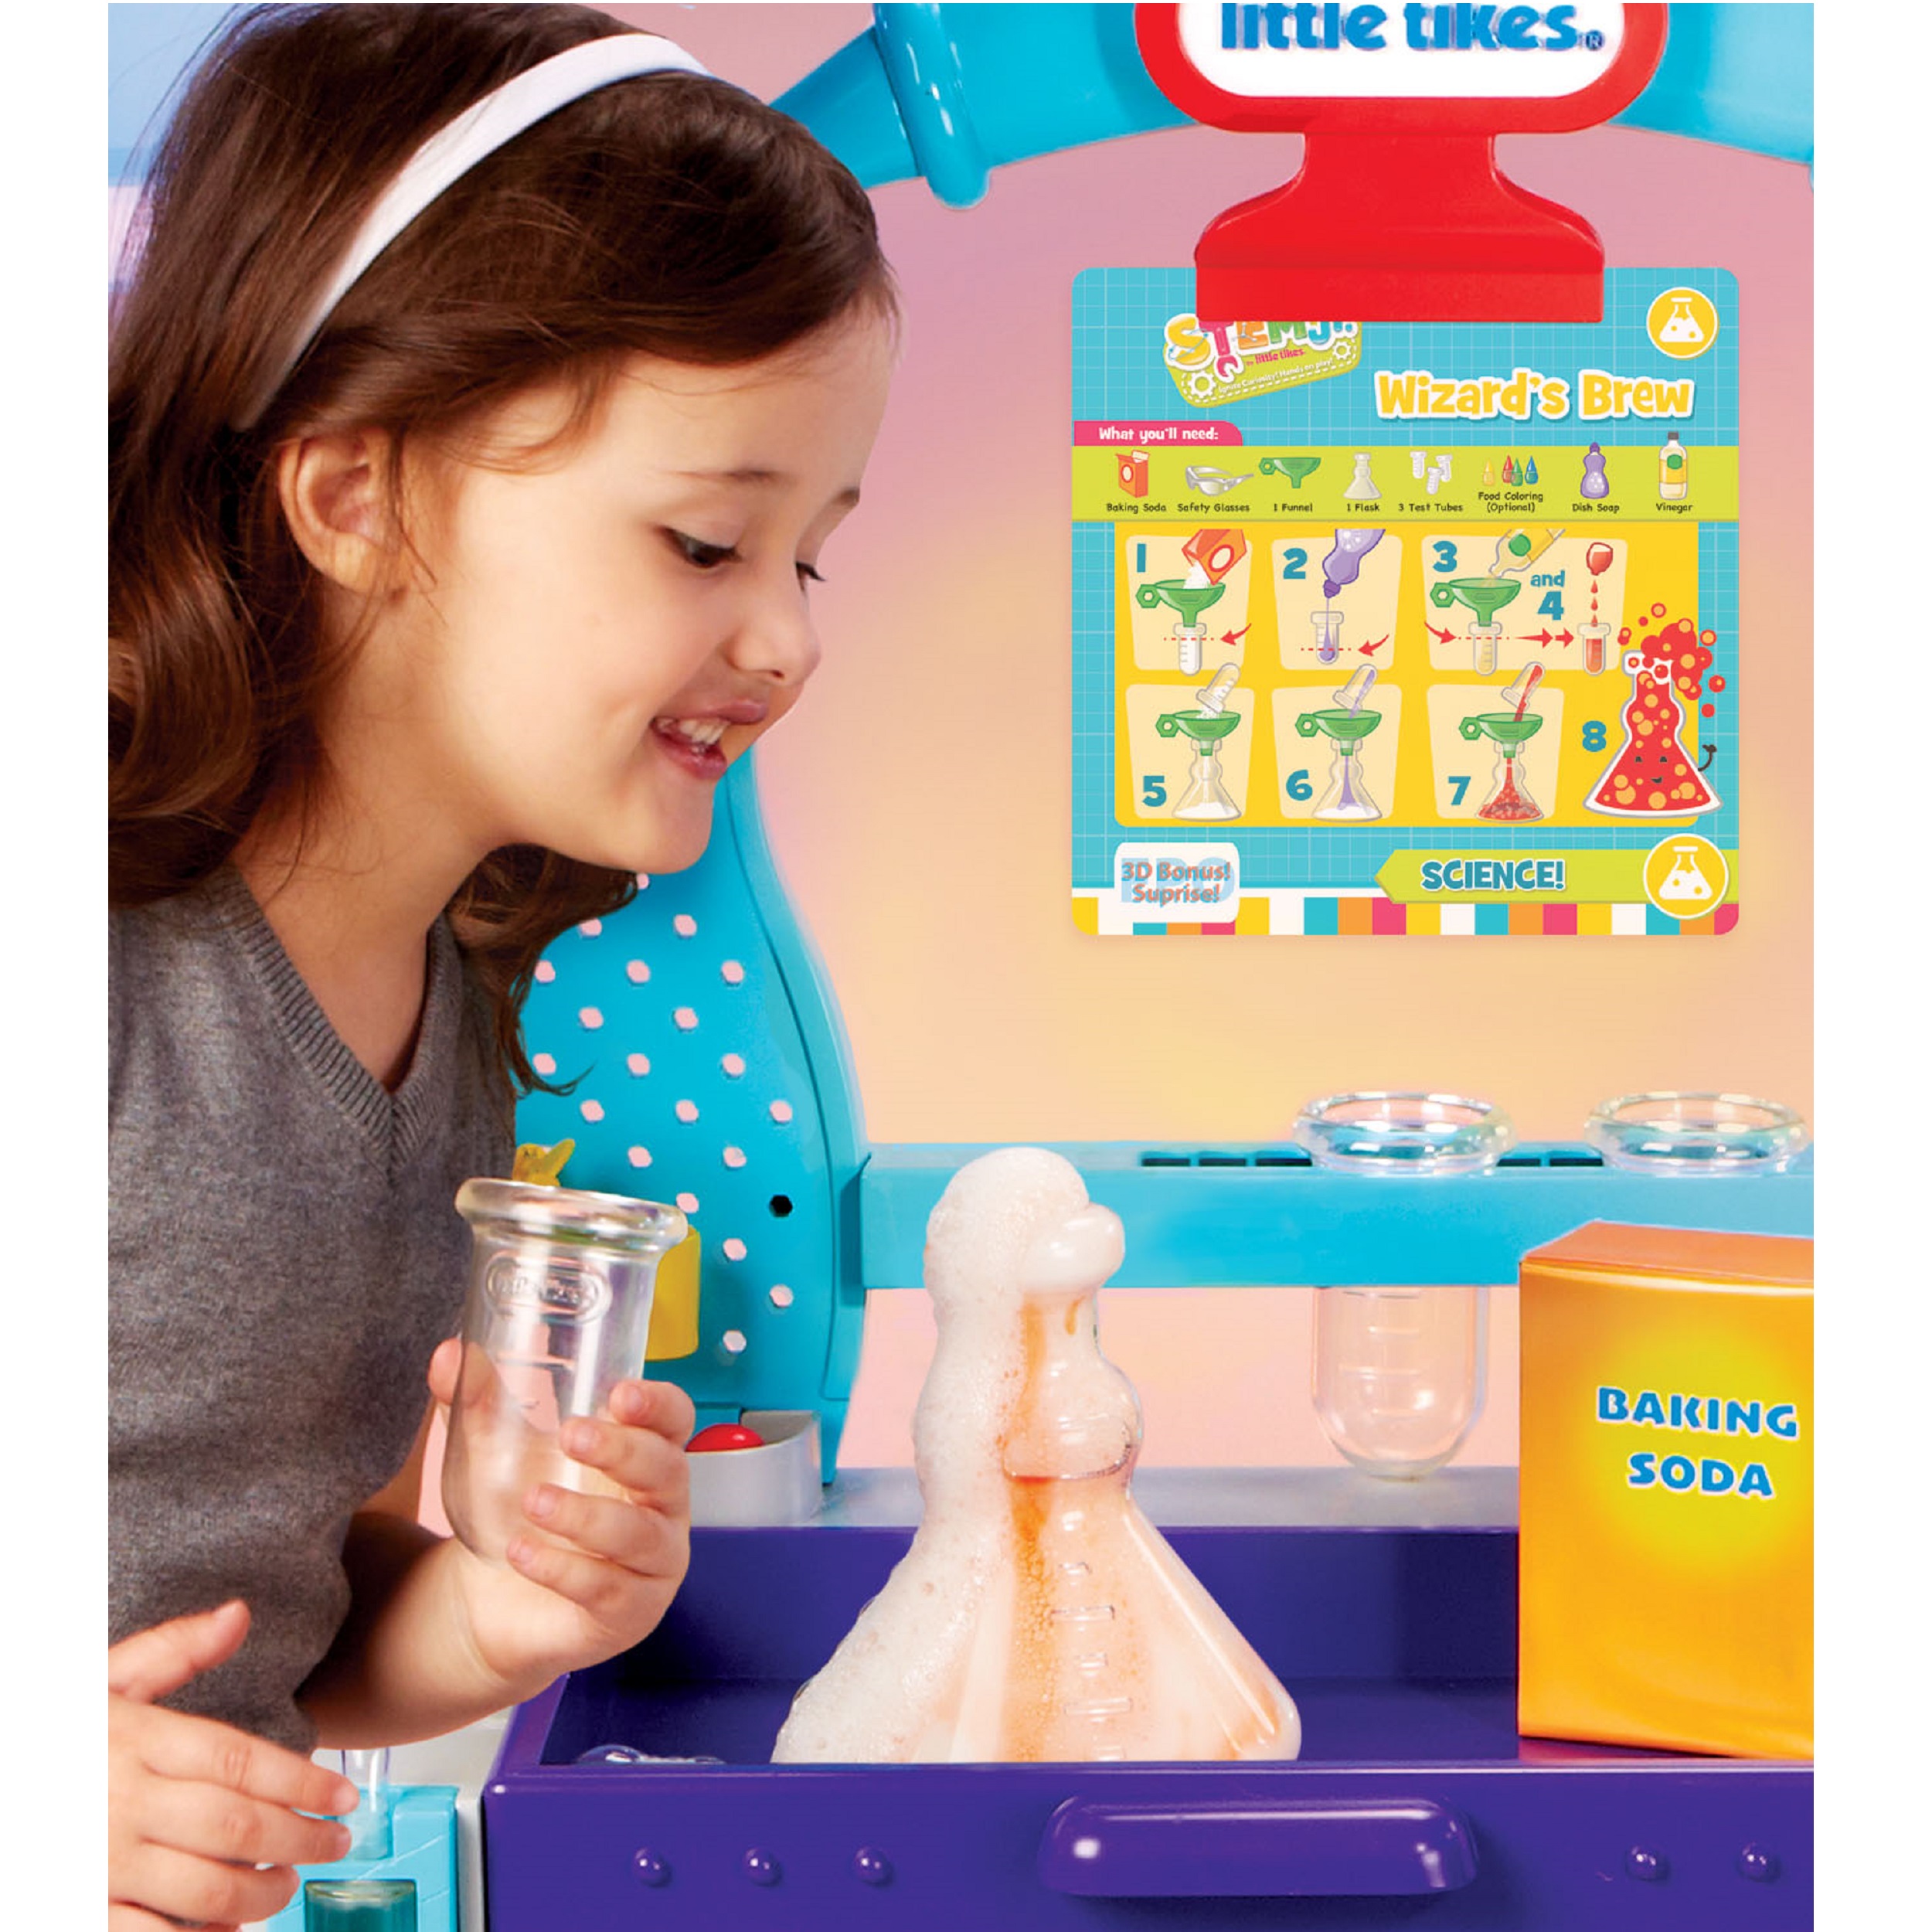 Little Tikes STEM Jr. Wonder Lab Toy with Experiments for Kids - image 5 of 8